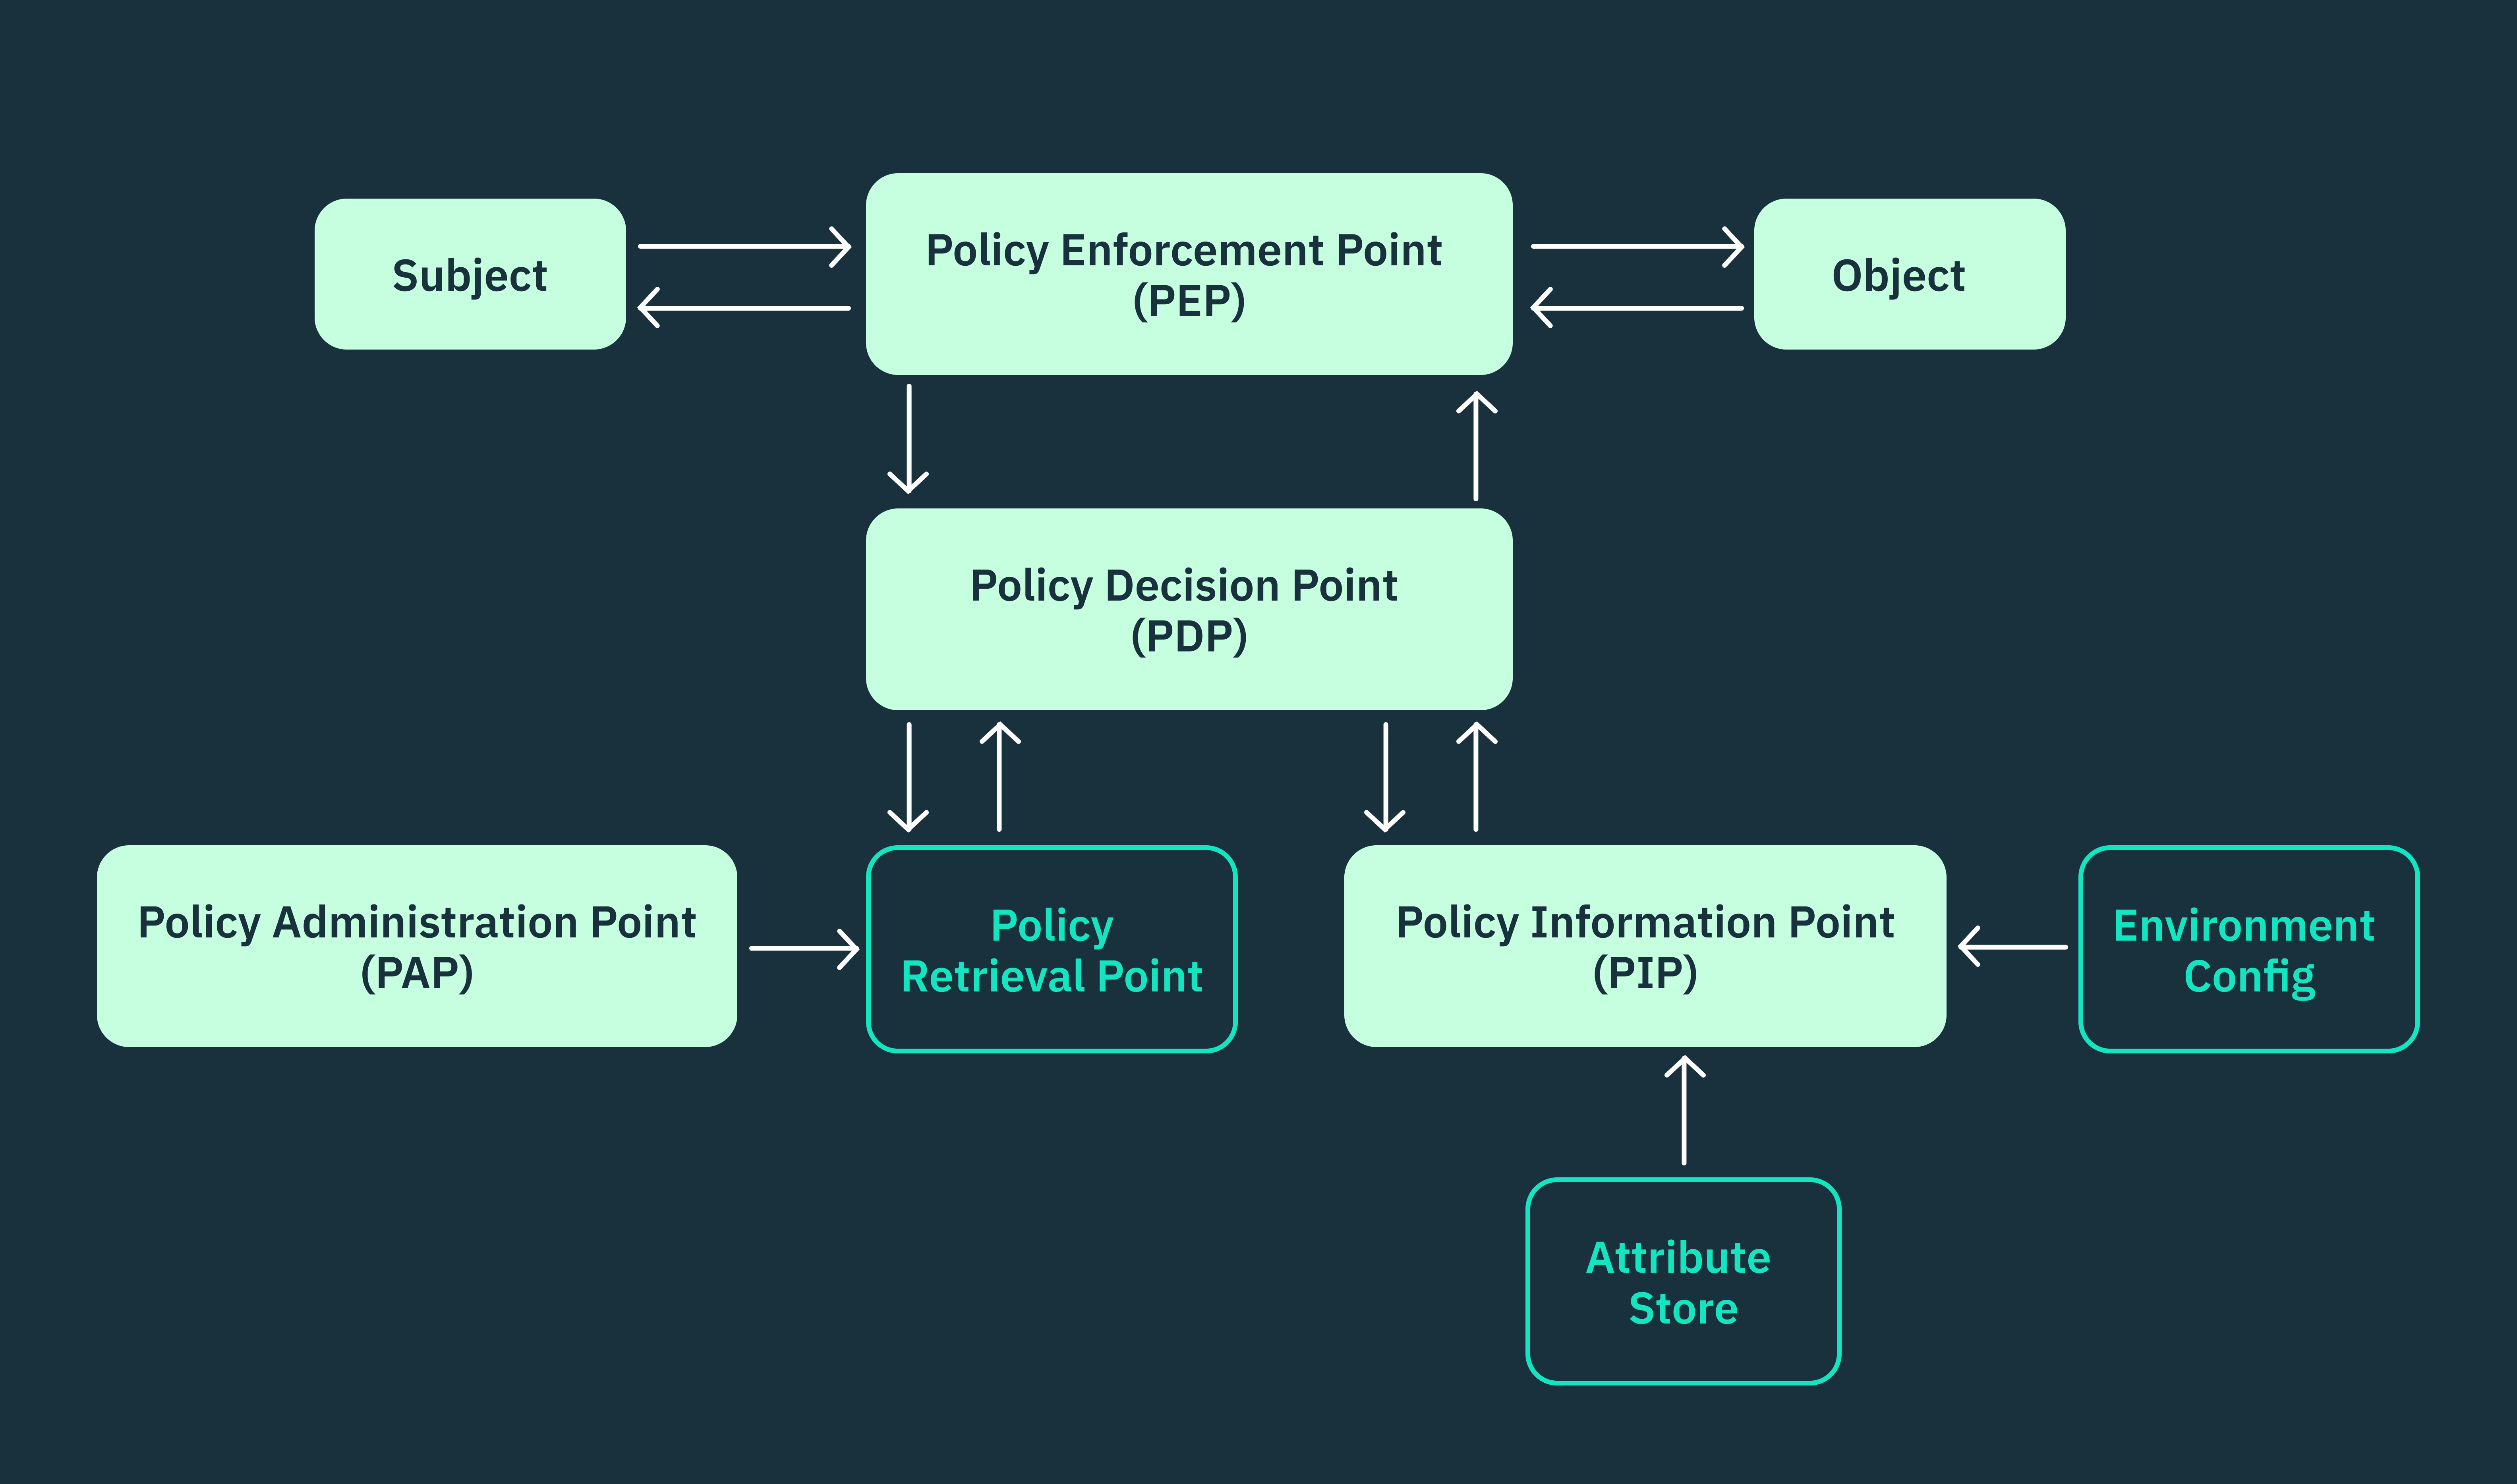 Diagram showing how the core principles (subject, PEP, PDP, PRP, PAP, PIP, attribute store, environment config, and object) of ABAC come together in ABAC architectures.